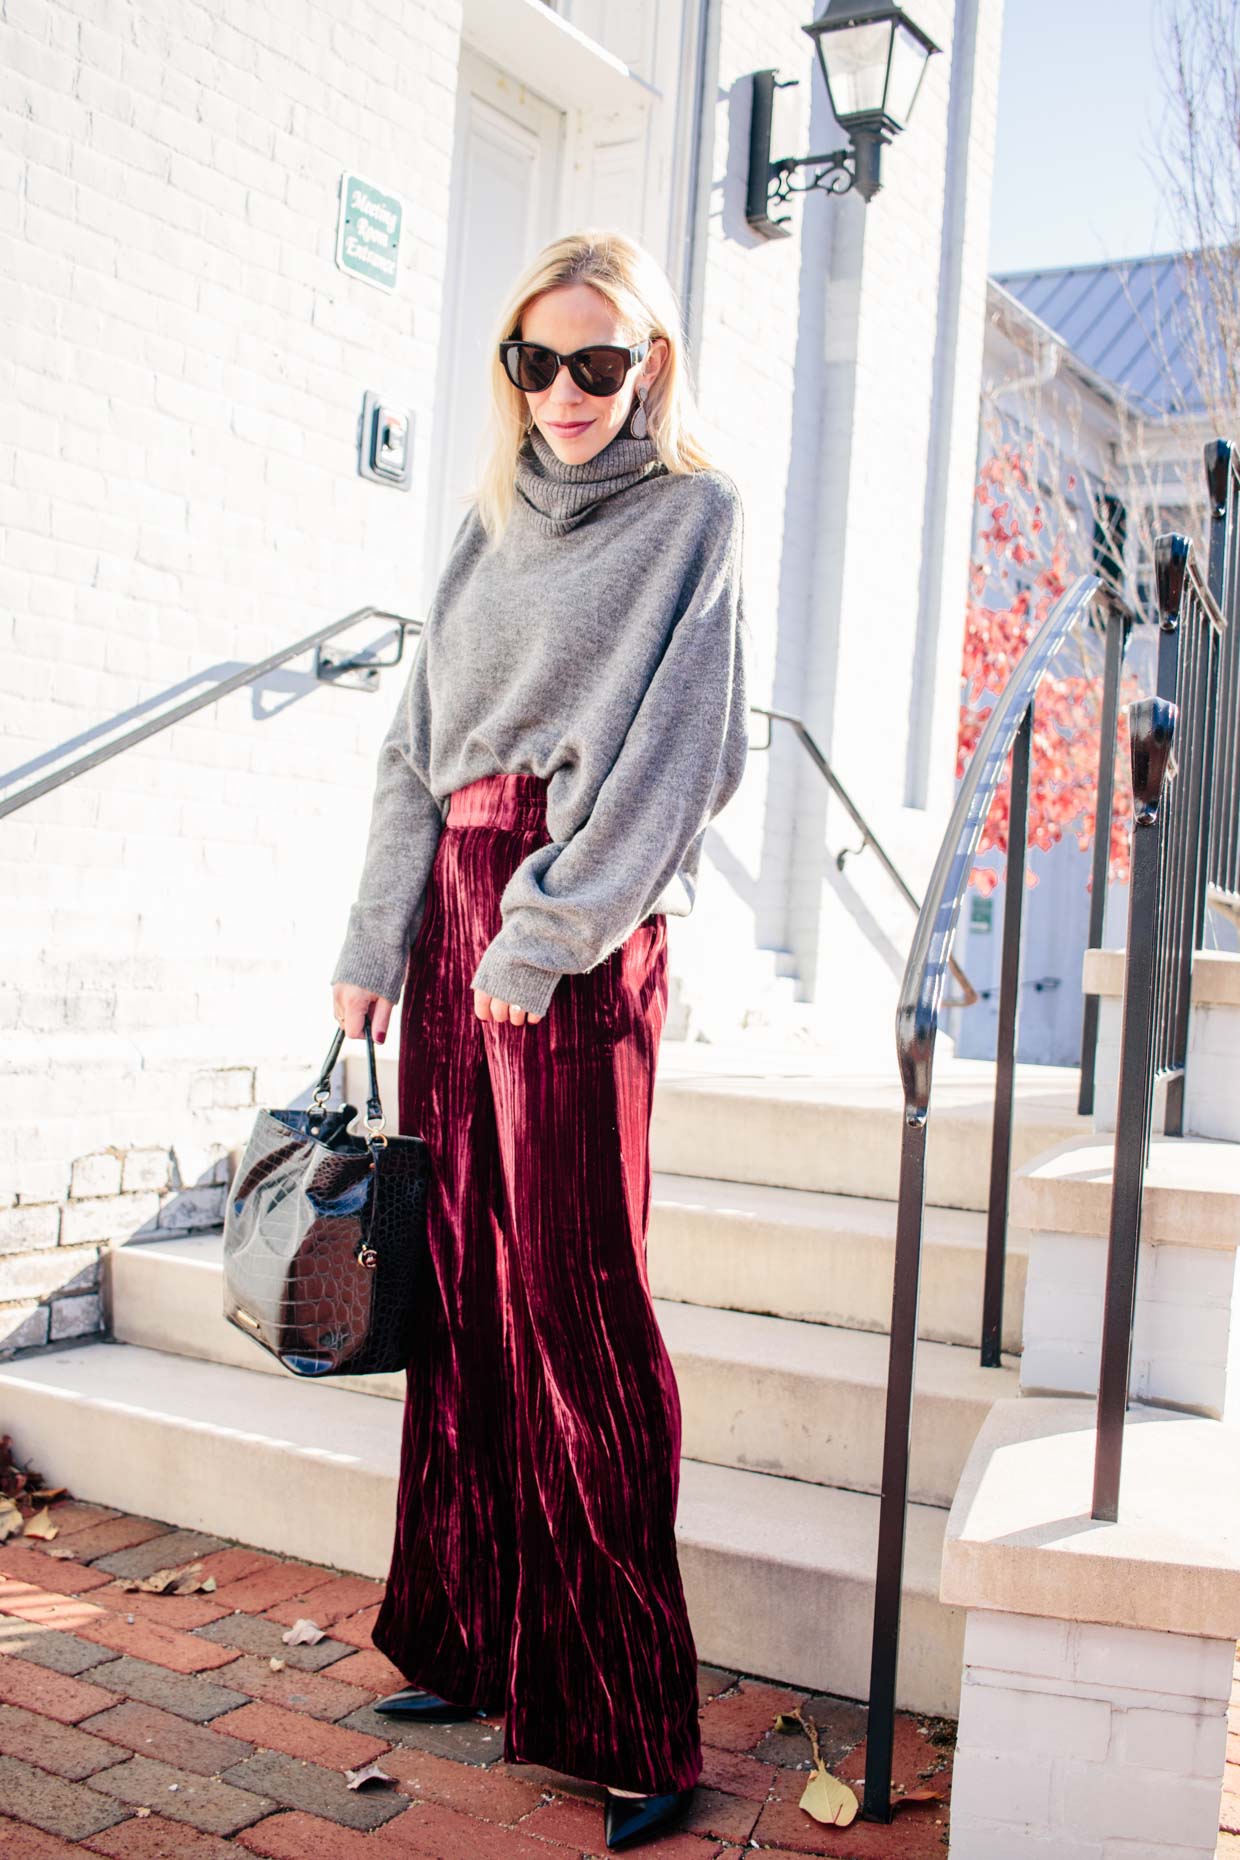 https://www.meagansmoda.com/wp-content/uploads/2019/12/Meagan-Brandon-fashion-blogger-of-Meagans-Moda-wears-gray-oversized-turtleneck-sweater-with-red-velvet-pants-for-chic-cozy-holiday-outfit.jpg